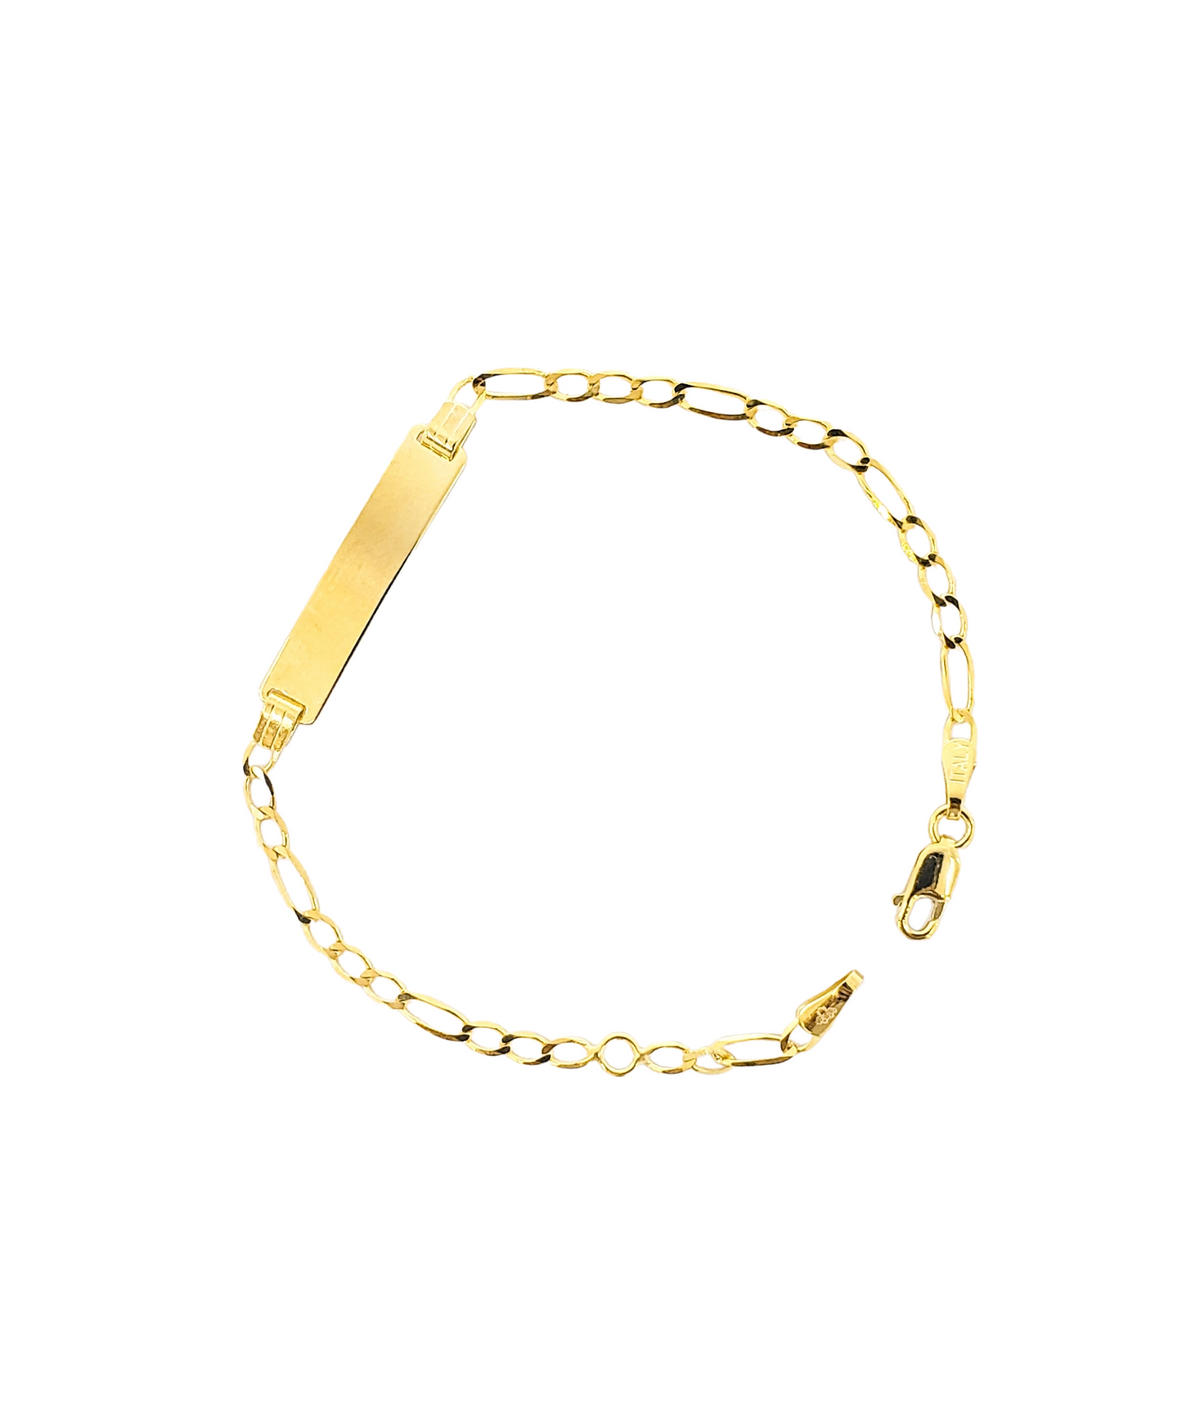 10K Yellow Gold Bracelet with Engravable Plate, 5.75-6.5&quot;